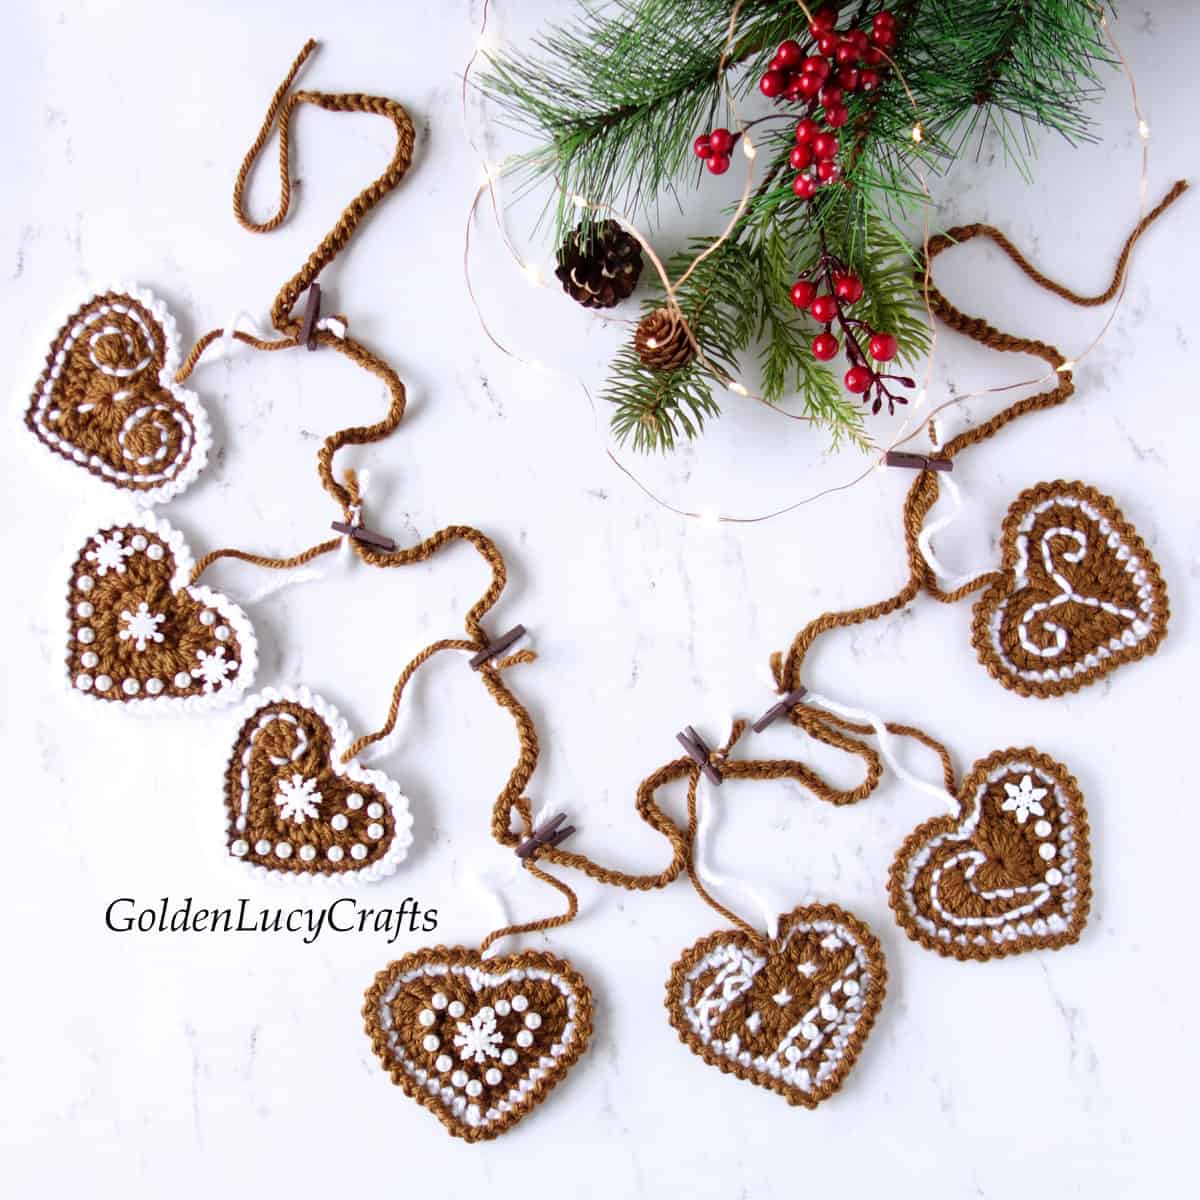 Crocheted gingerbread garland laying on the flat surface